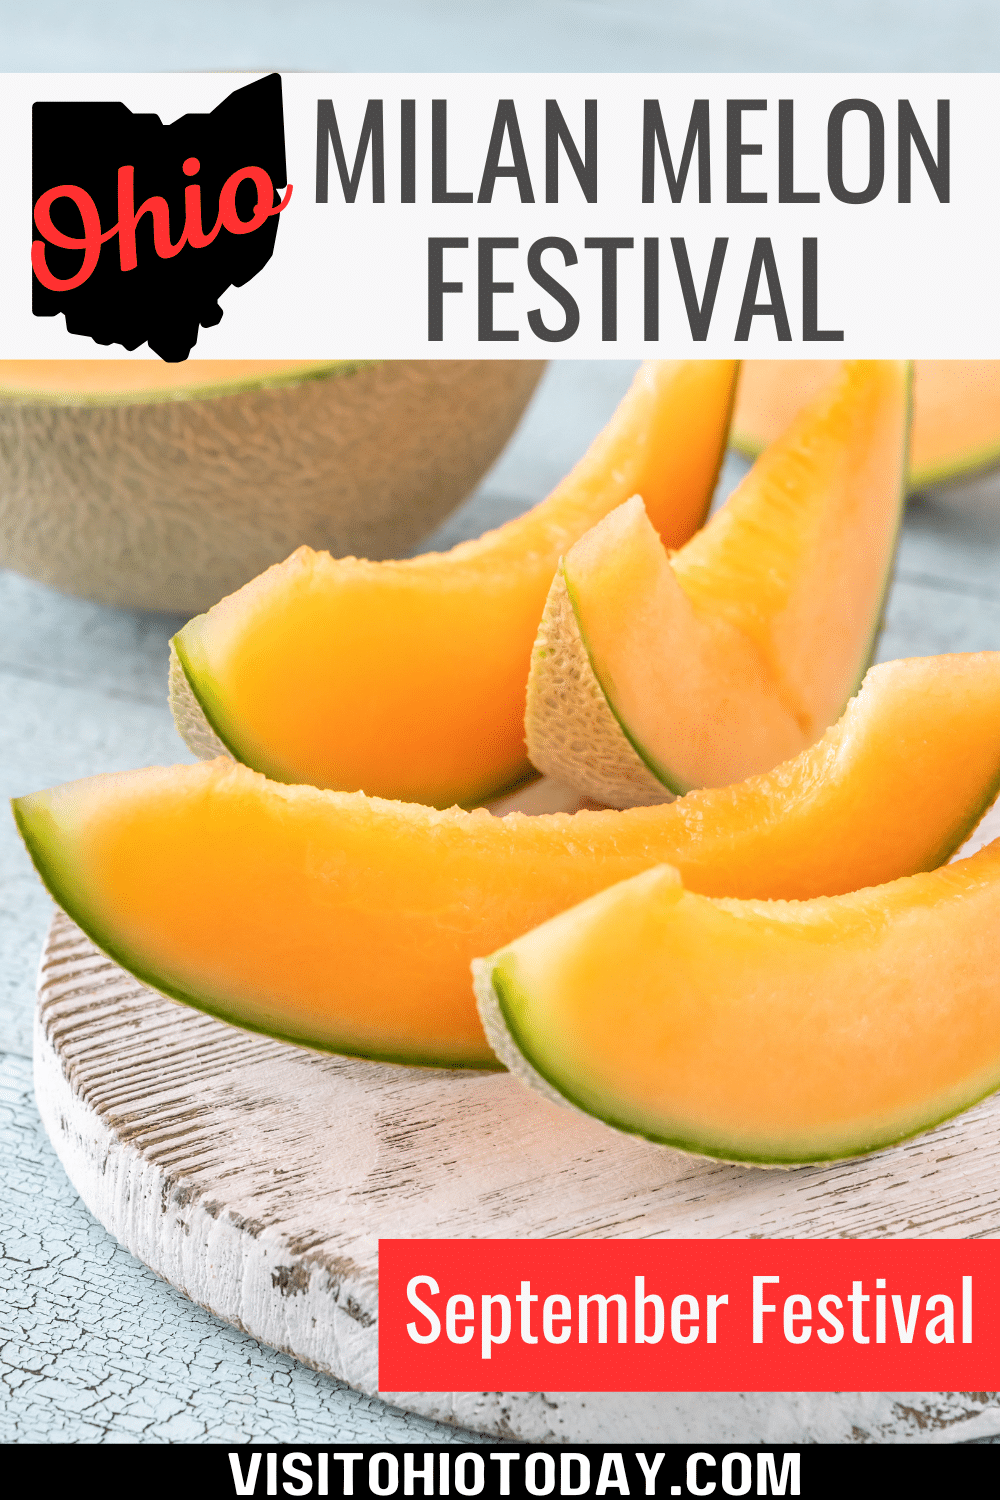 The Milan Melon Festival is held on Labor Day weekend every September. The festival has been running since 1958 and celebrates muskmelons that grow in abundance in this region and are at their ripest and most flavorsome at this time.